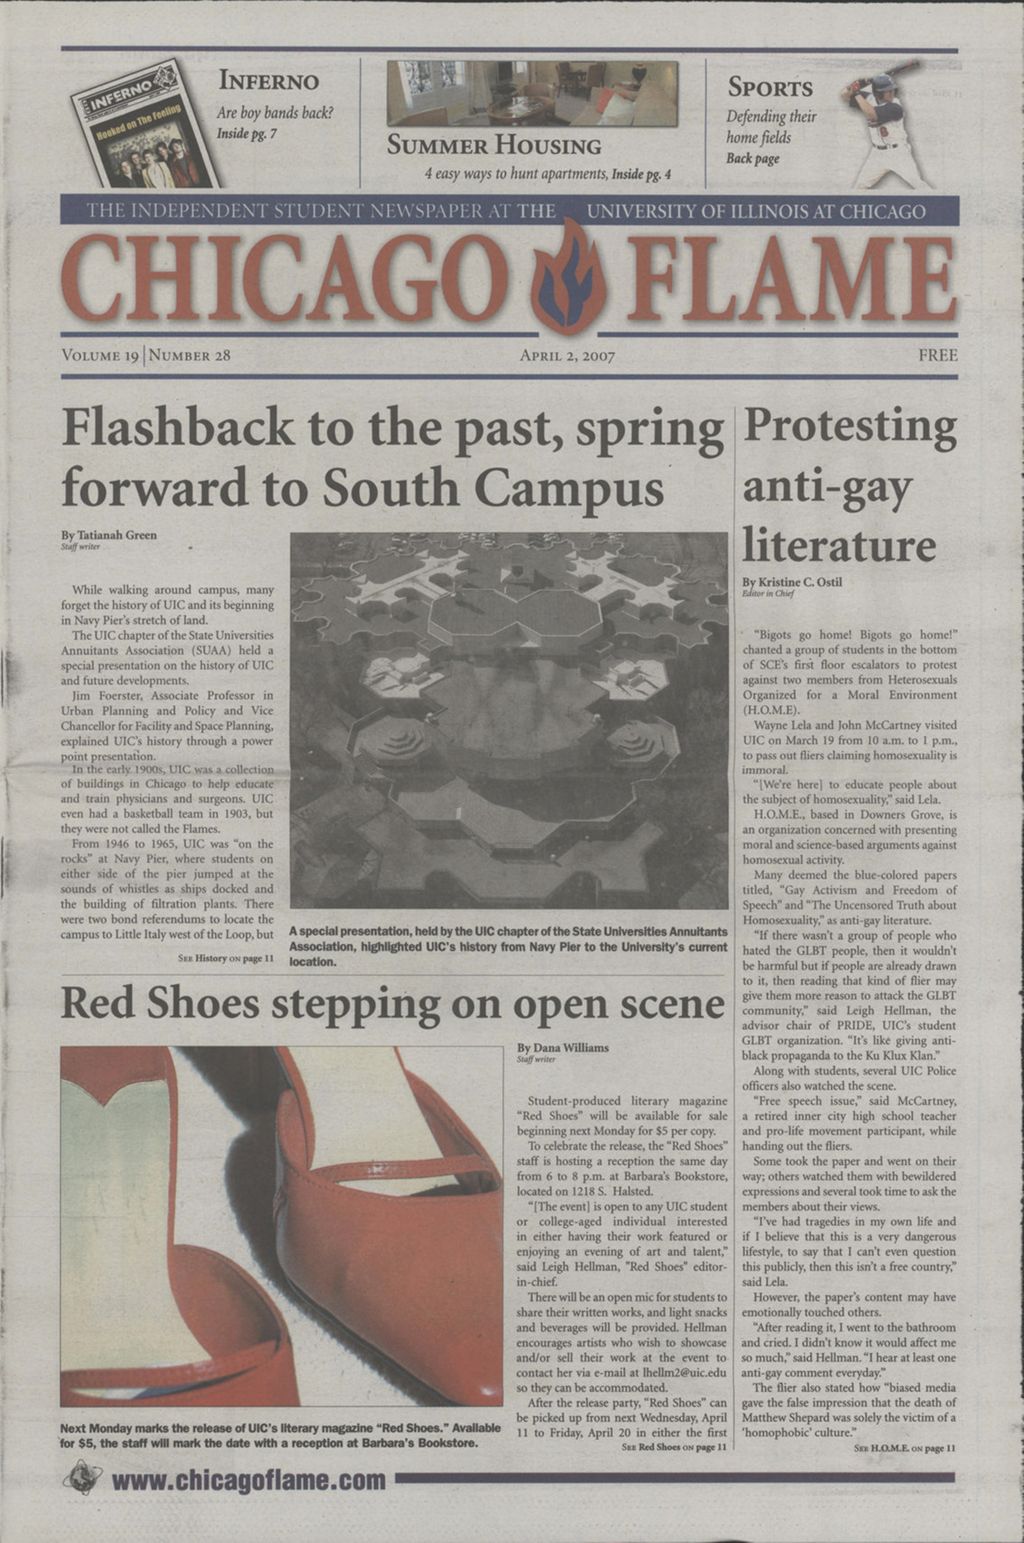 Miniature of Chicago Flame (April 2, 2007)